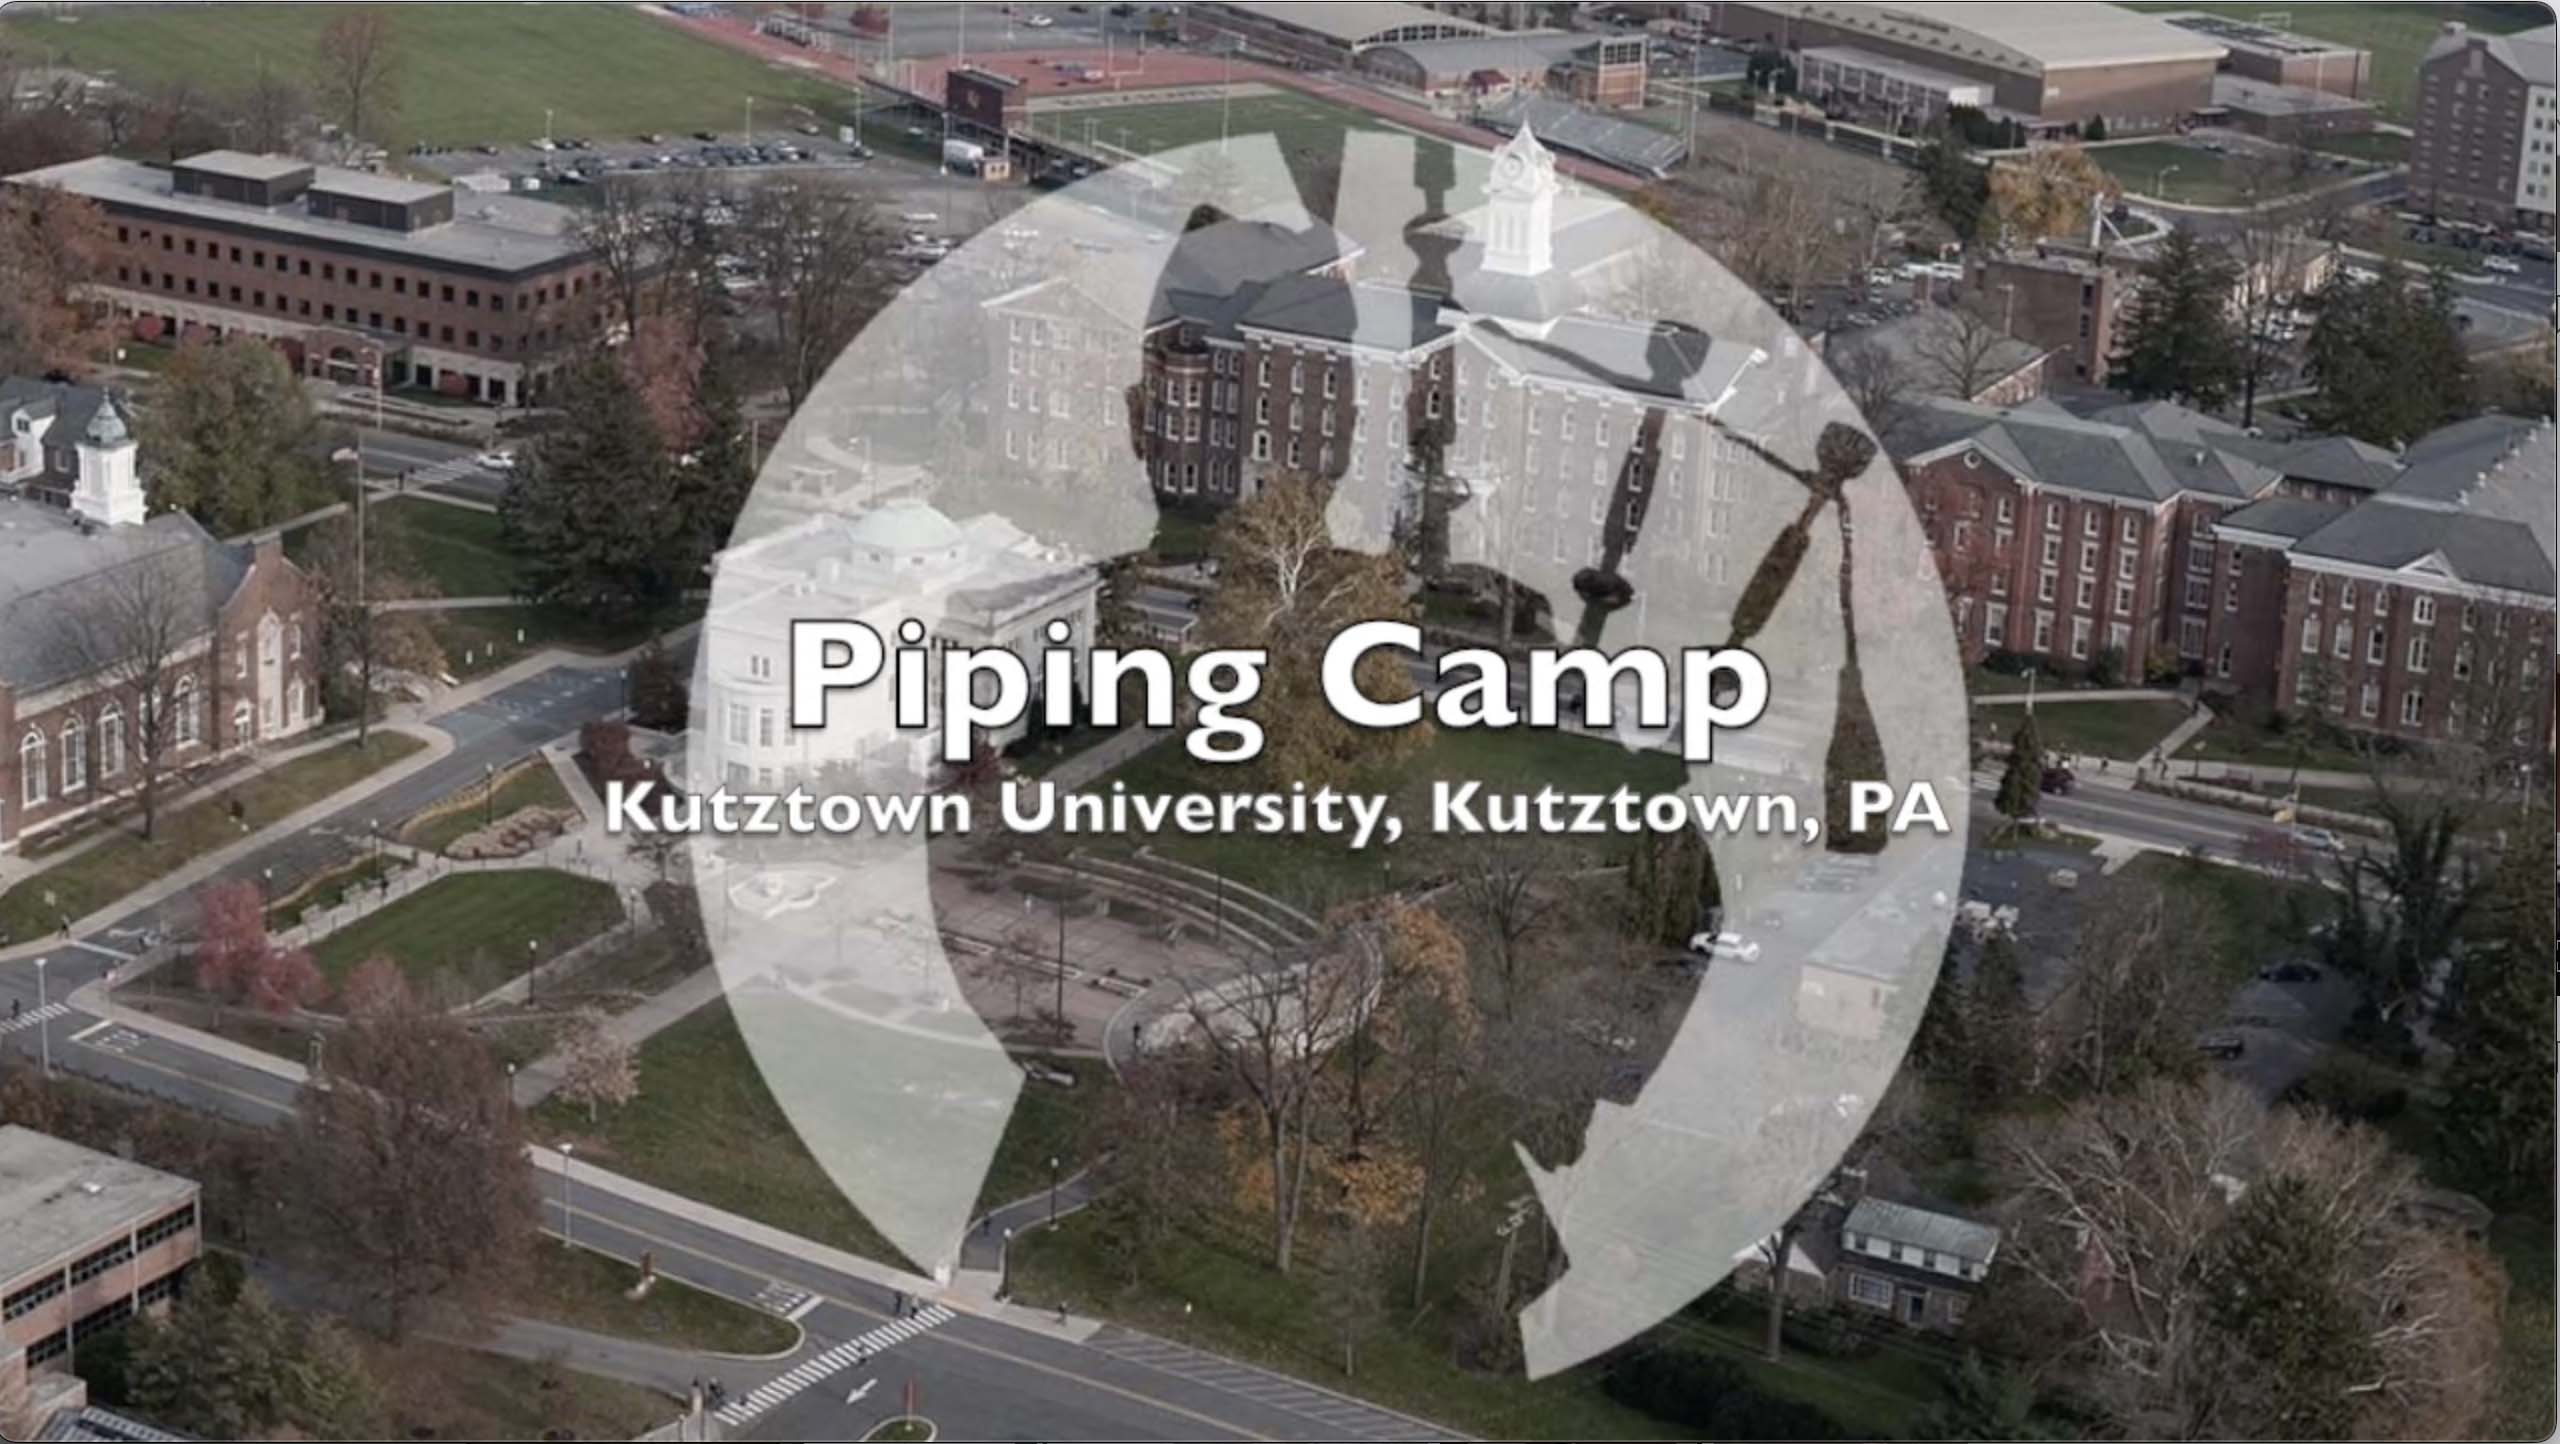 Bruce Gandy, Derek Midgley, and Andrew Carlisle will teach at Balmoral's summer Piping Camp to be held held on the beautiful Kutztown University campus, Kutztown, PA, from July 7-12, 2024.